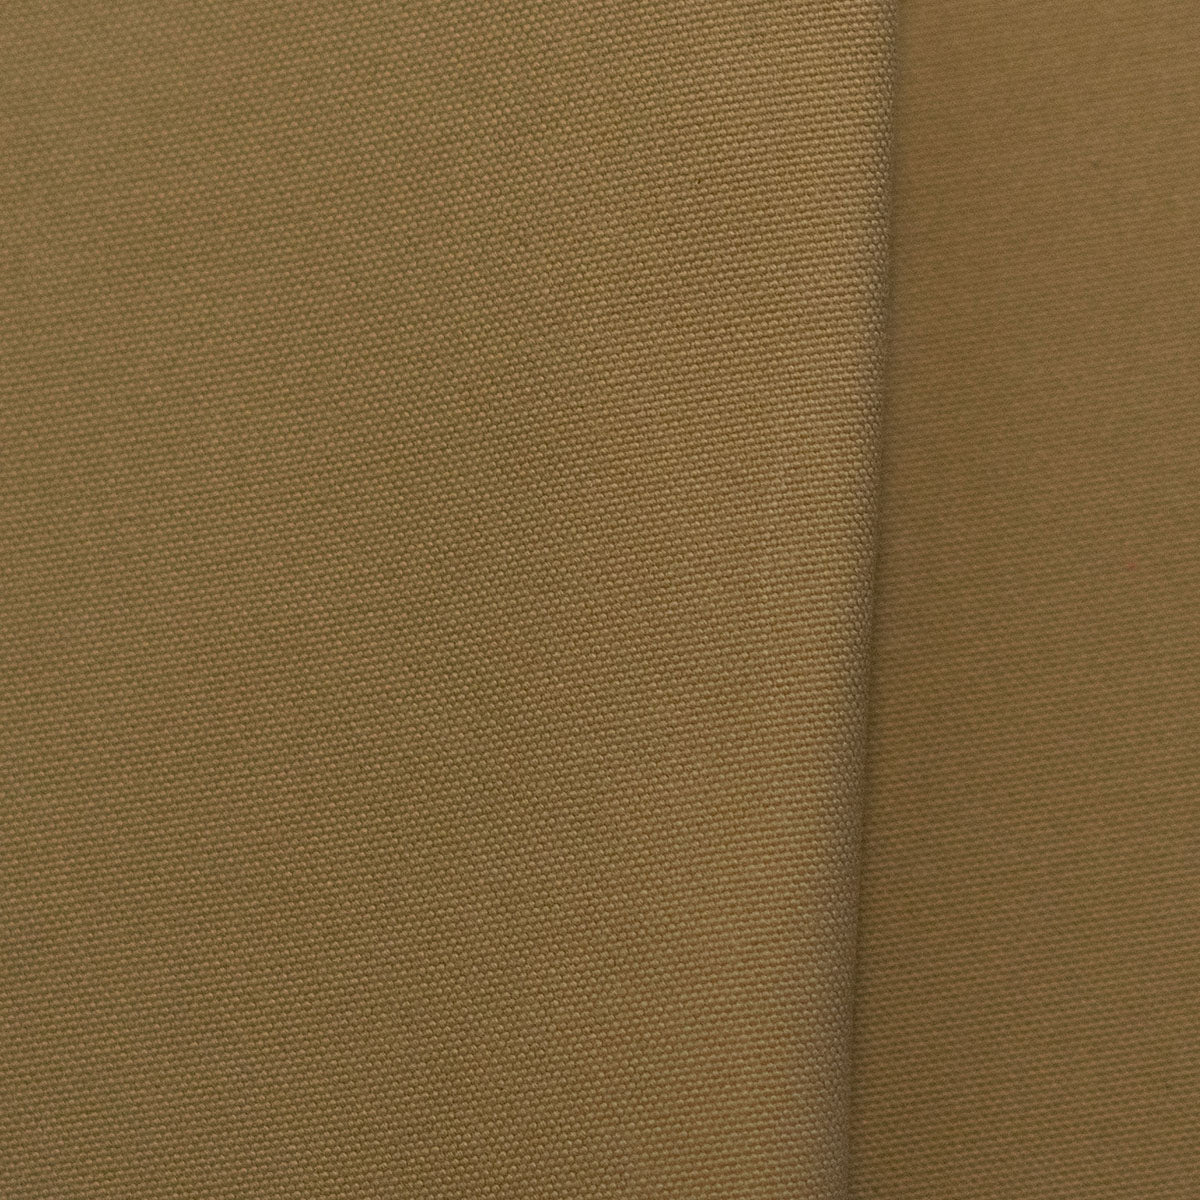 MH-6 No.6 comed yarn cotton canvas (Paraffin coated)